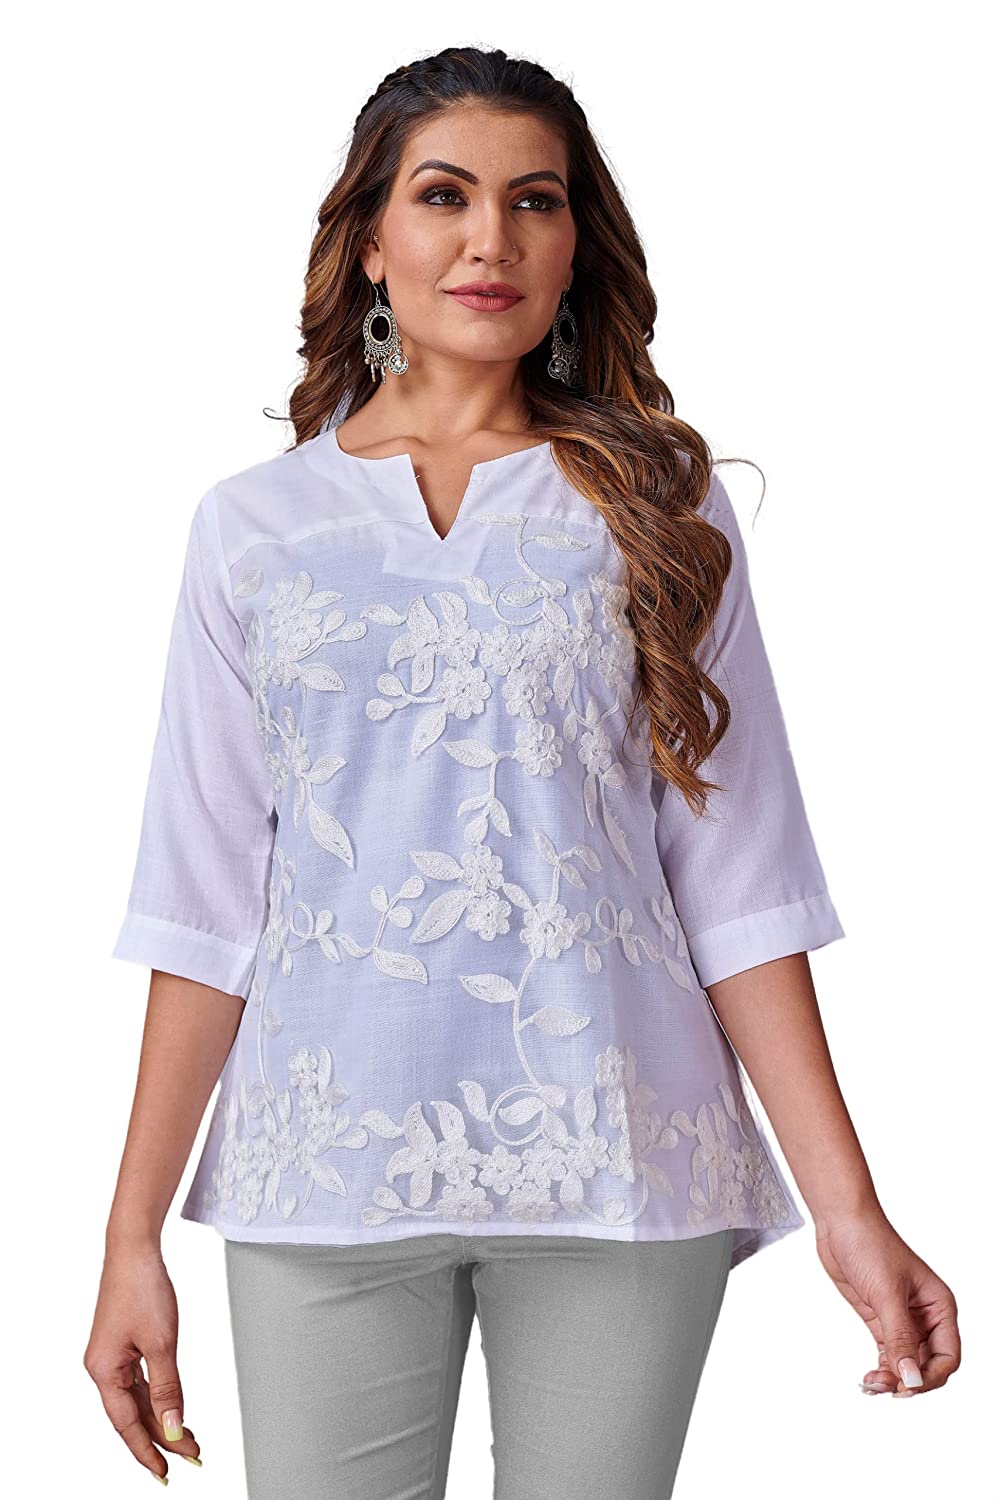 Women's White Cotton Blend & Net Embroidered Top